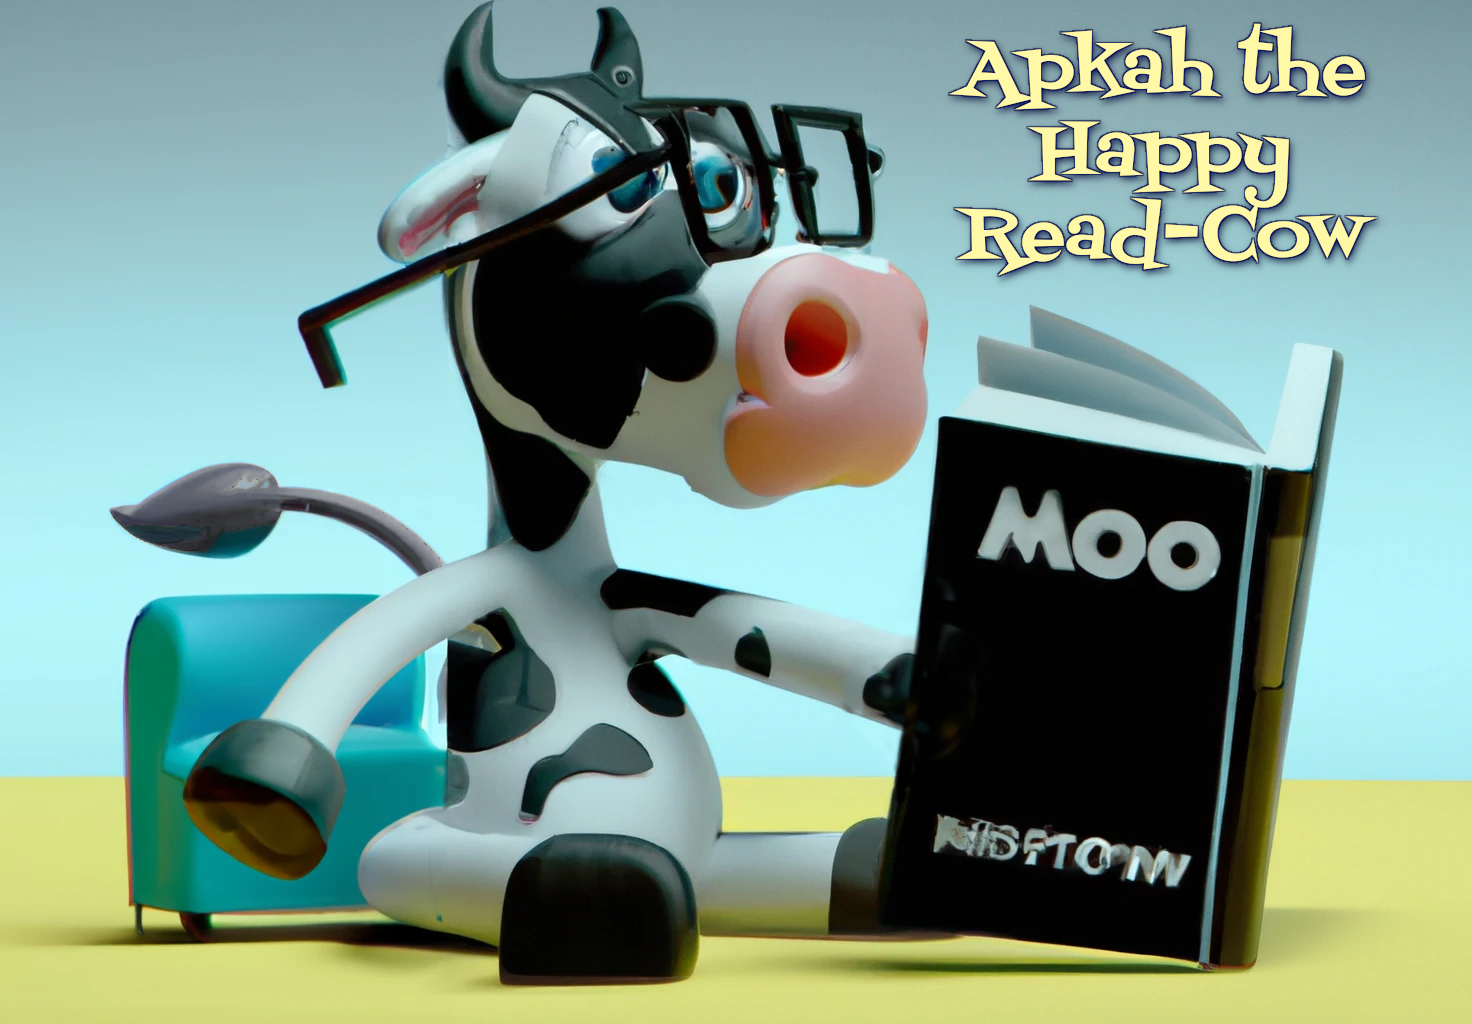 The light yellow headline in a fun angled font says 'Apkah the happy read cow' and underneath is a cute 3-D cartoonish cow with thick black frame glasses reading a book entitled MOO